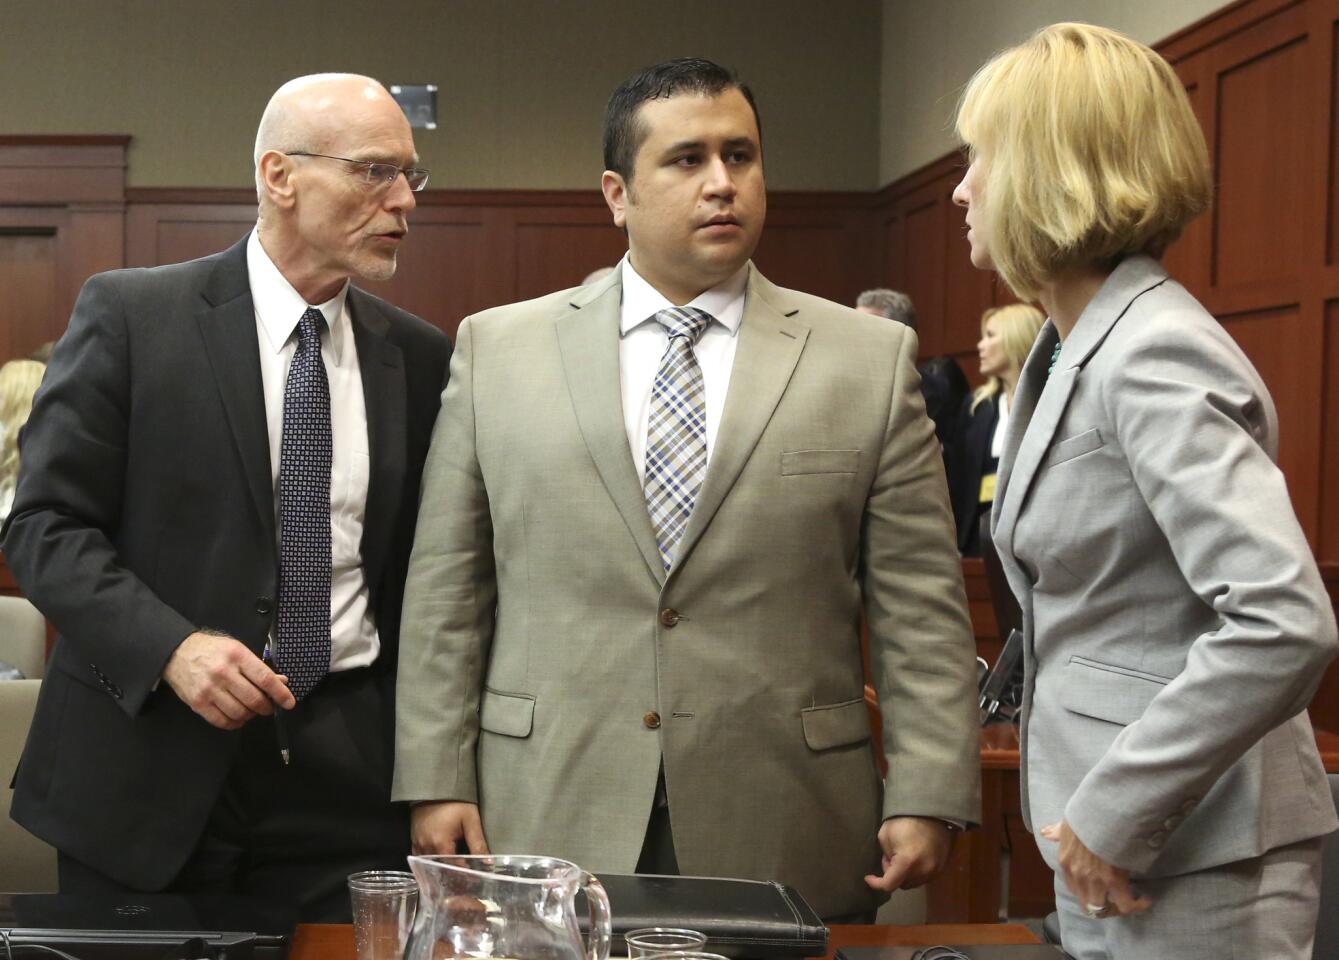 Don West, left, and Lorna Truett, talk with their client George Zimmerman during his trial in Seminole circuit court in Sanford, Fla. Tuesday, June 25, 2013. Zimmerman has been charged with second-degree murder for the 2012 shooting death of Trayvon Martin. (Gary W. Green/Orlando Sentinel)